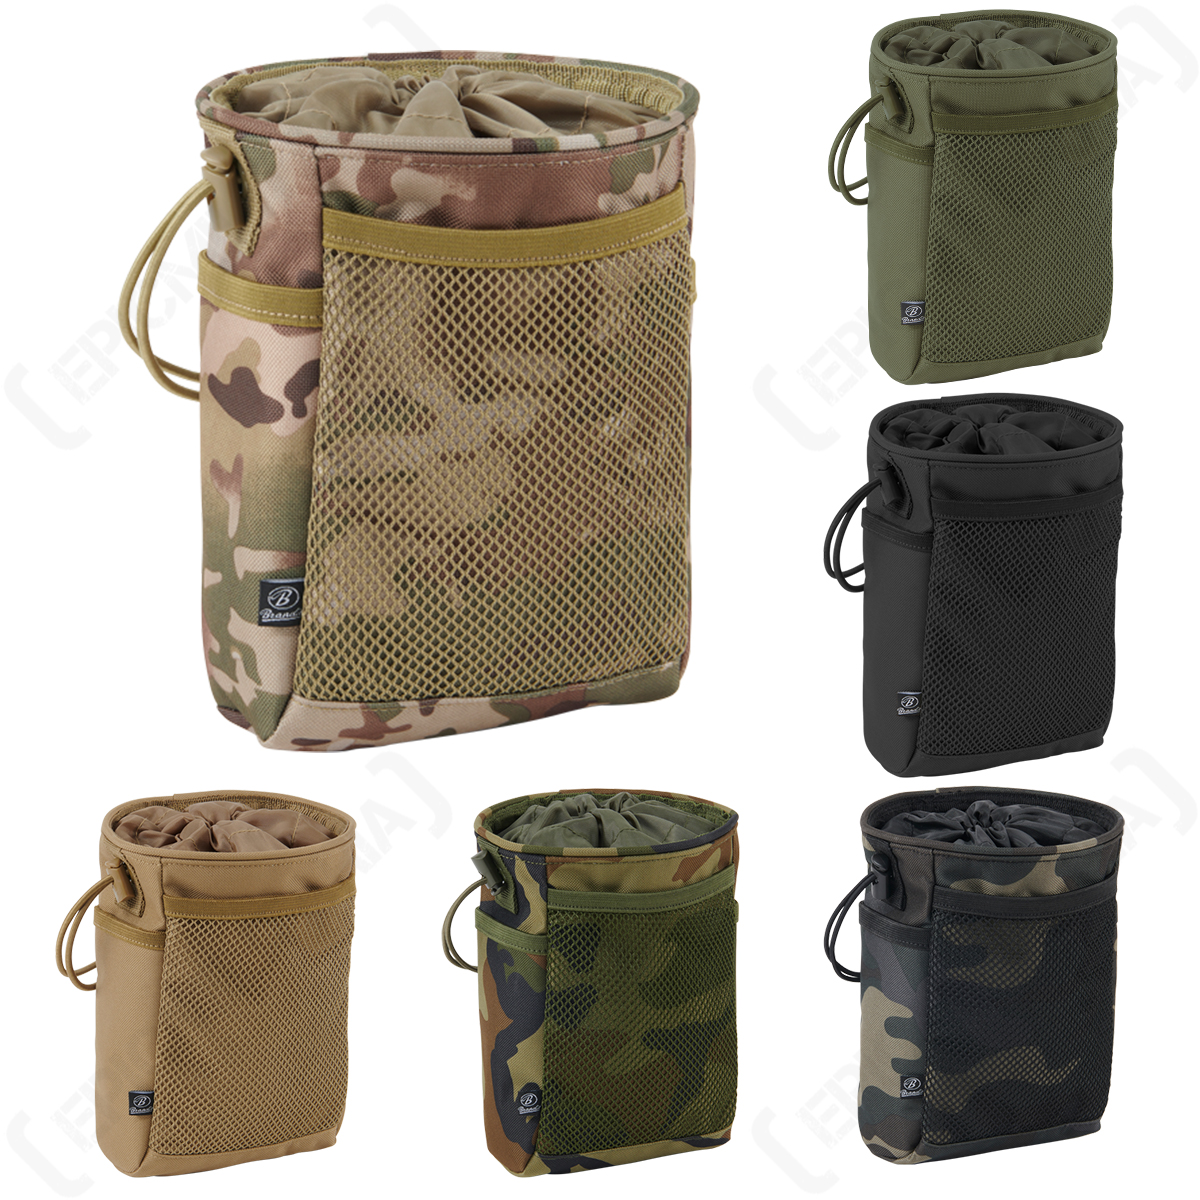 Tactical pouch for Russian small infantry shovel MOLLE/PALS Bag Airsoft Army 